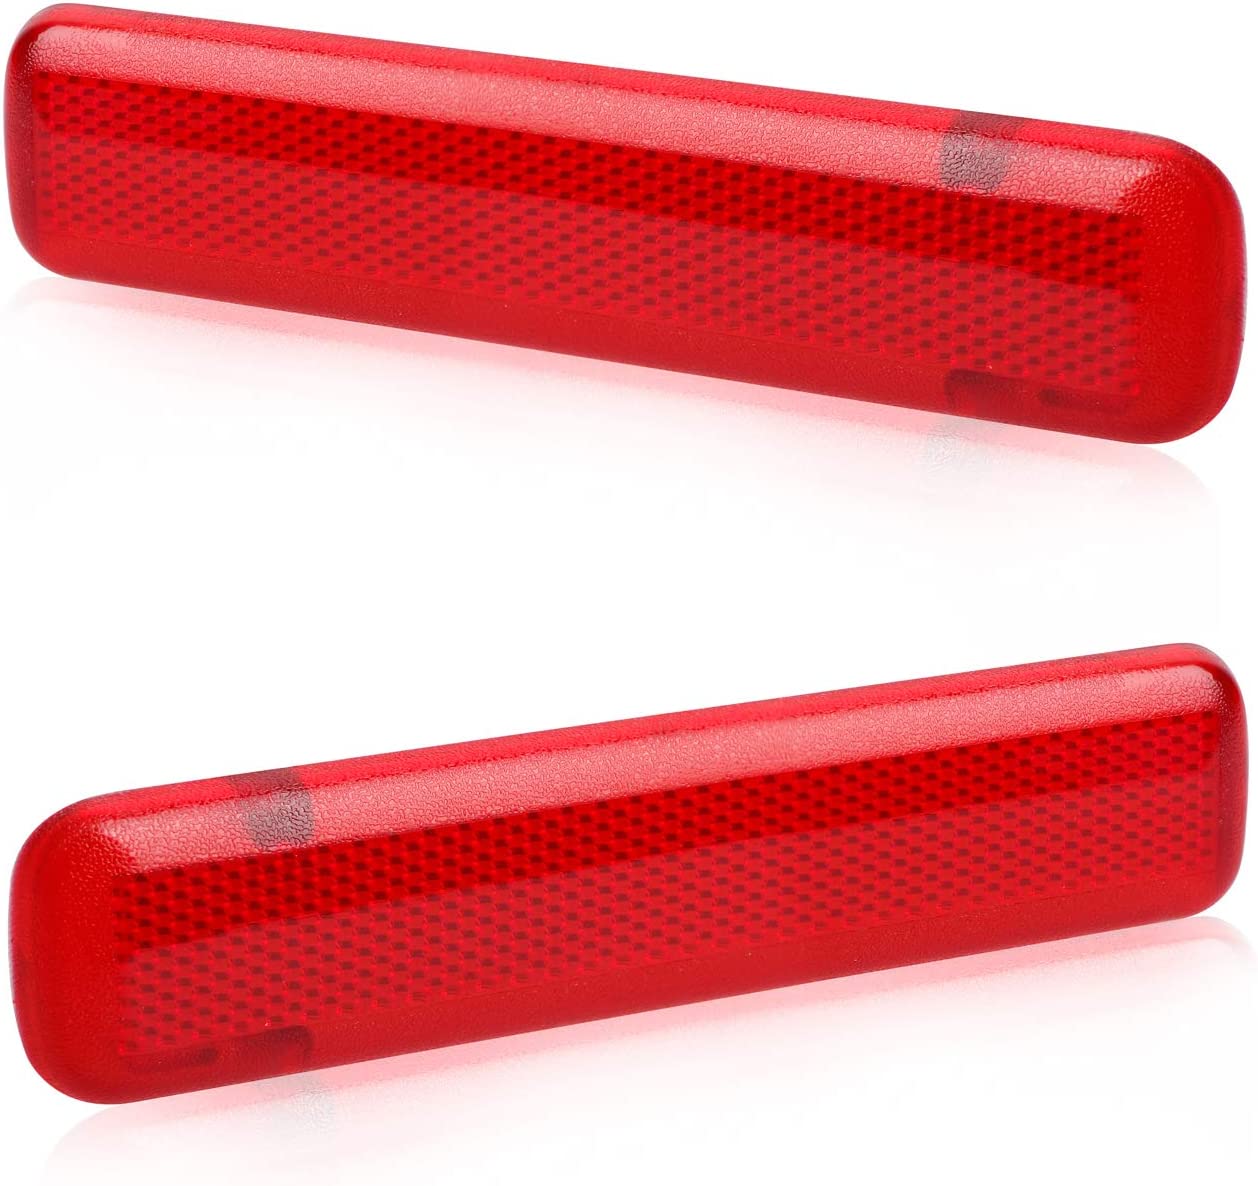 HERCOO Rear Door Trim Panel Red Left & Right Reflector Light Cover Compatible with 2003-2007 GMC Sierra 15183155 15183156 74367 74368, Pack of 2